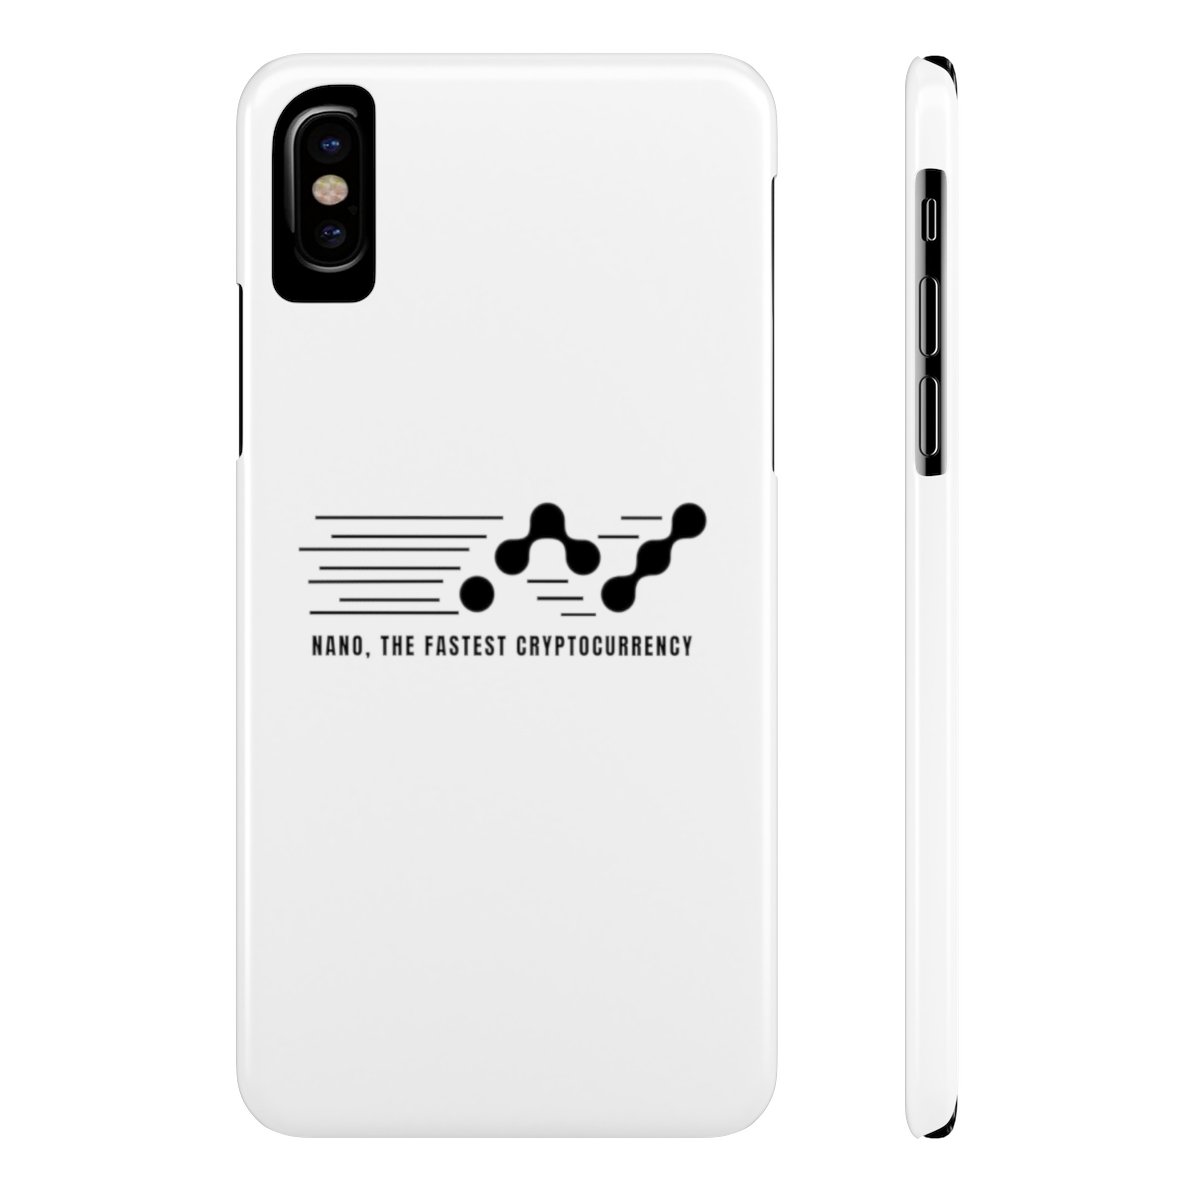 Nano, the fastest - Case Mate Slim Phone Cases TCP1607 iPhone X Slim Official Crypto  Merch